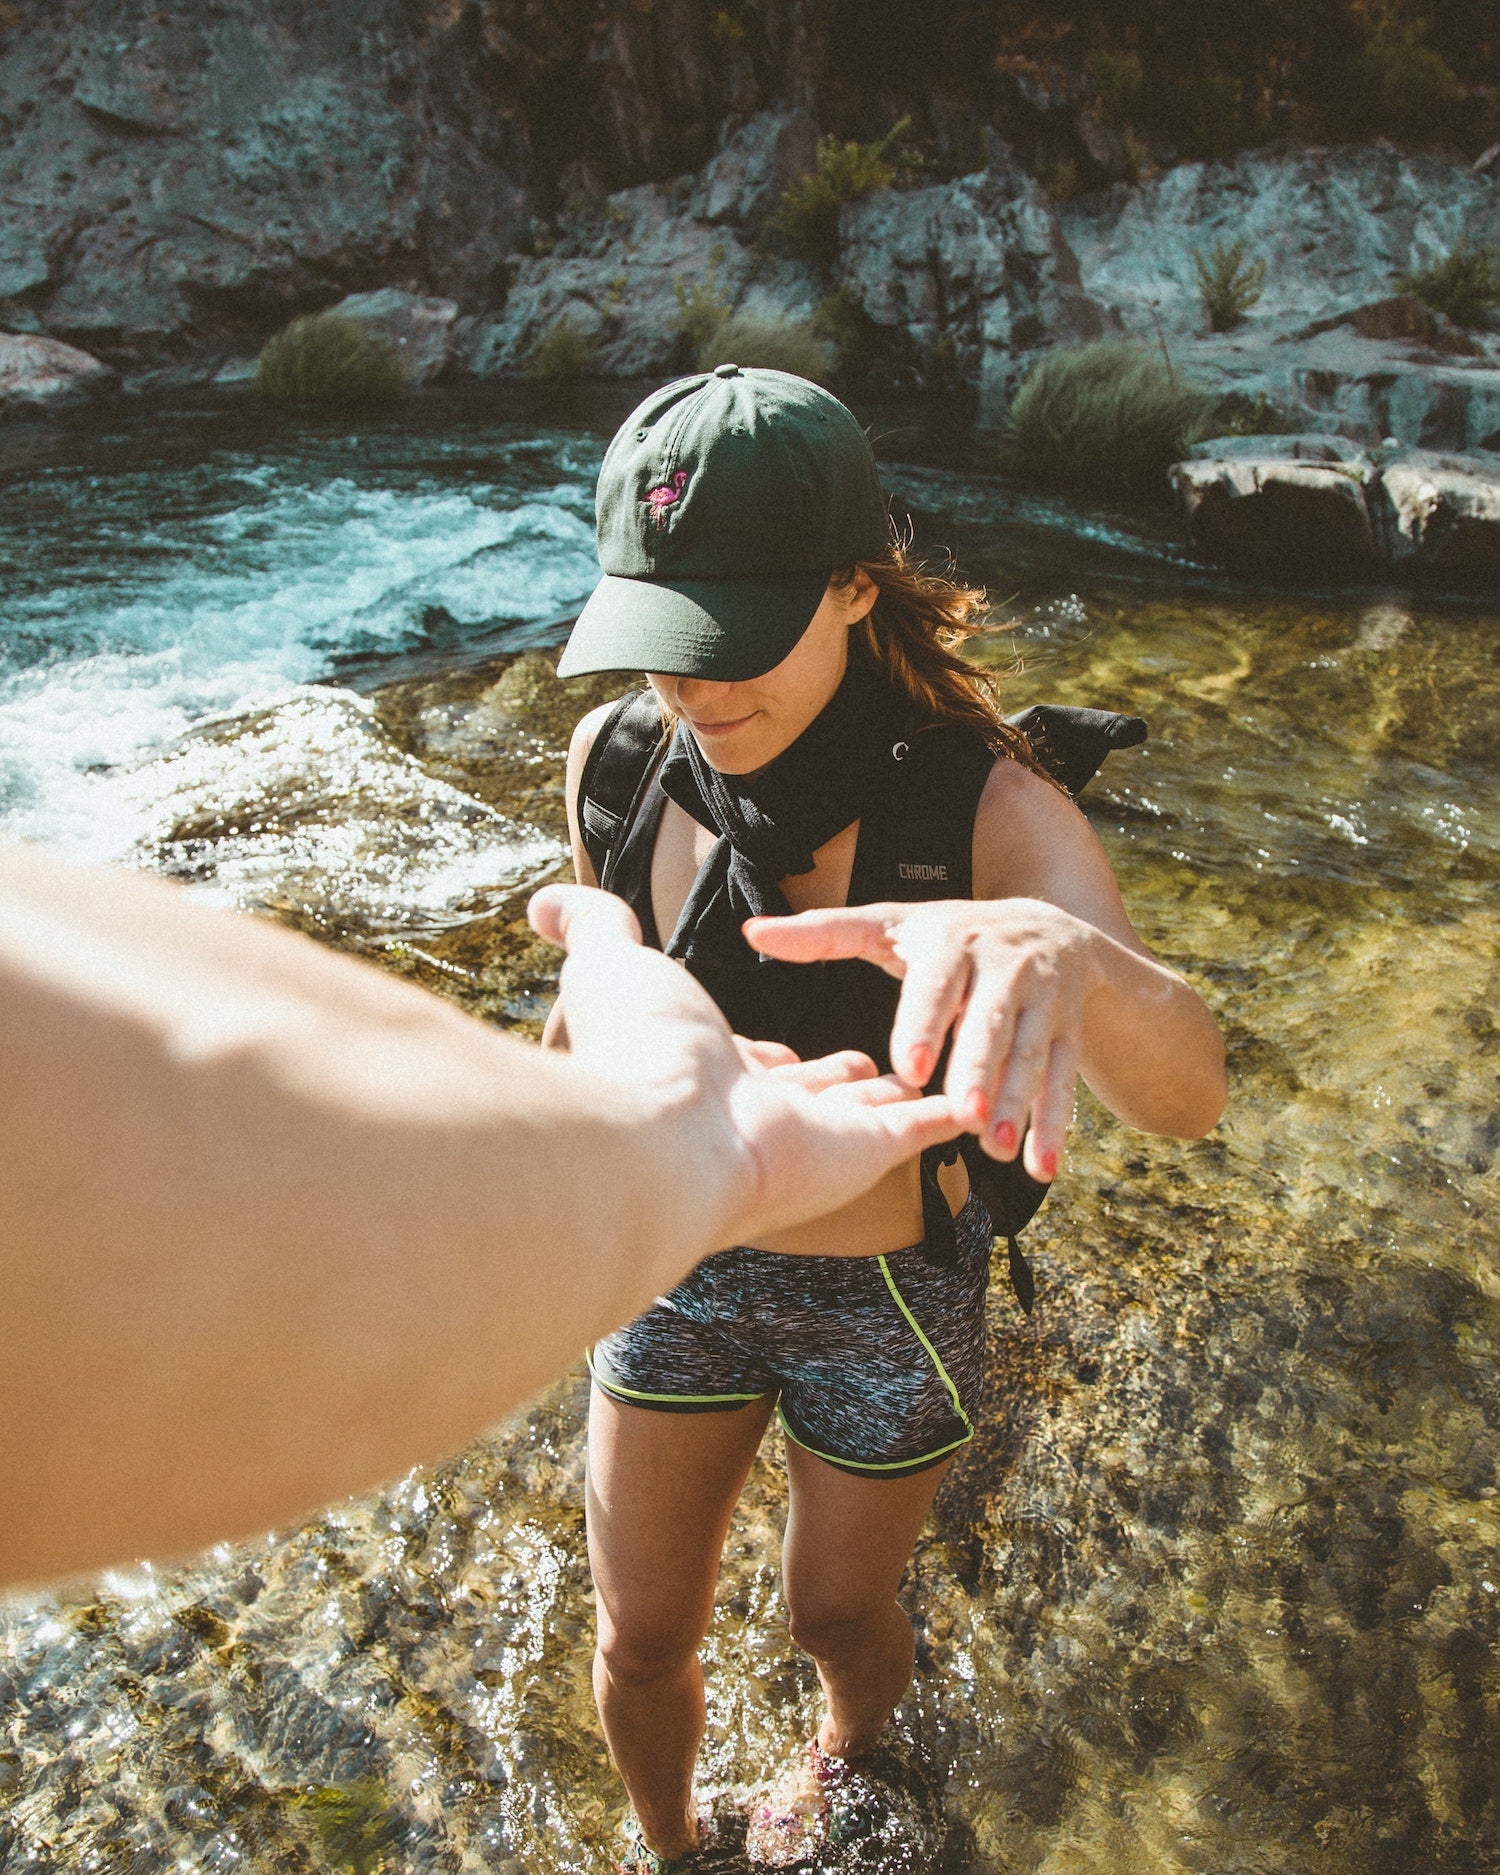 A man reaches out his hand to help his girlfriend as they hike up a cliffside together and she reaches for his hand